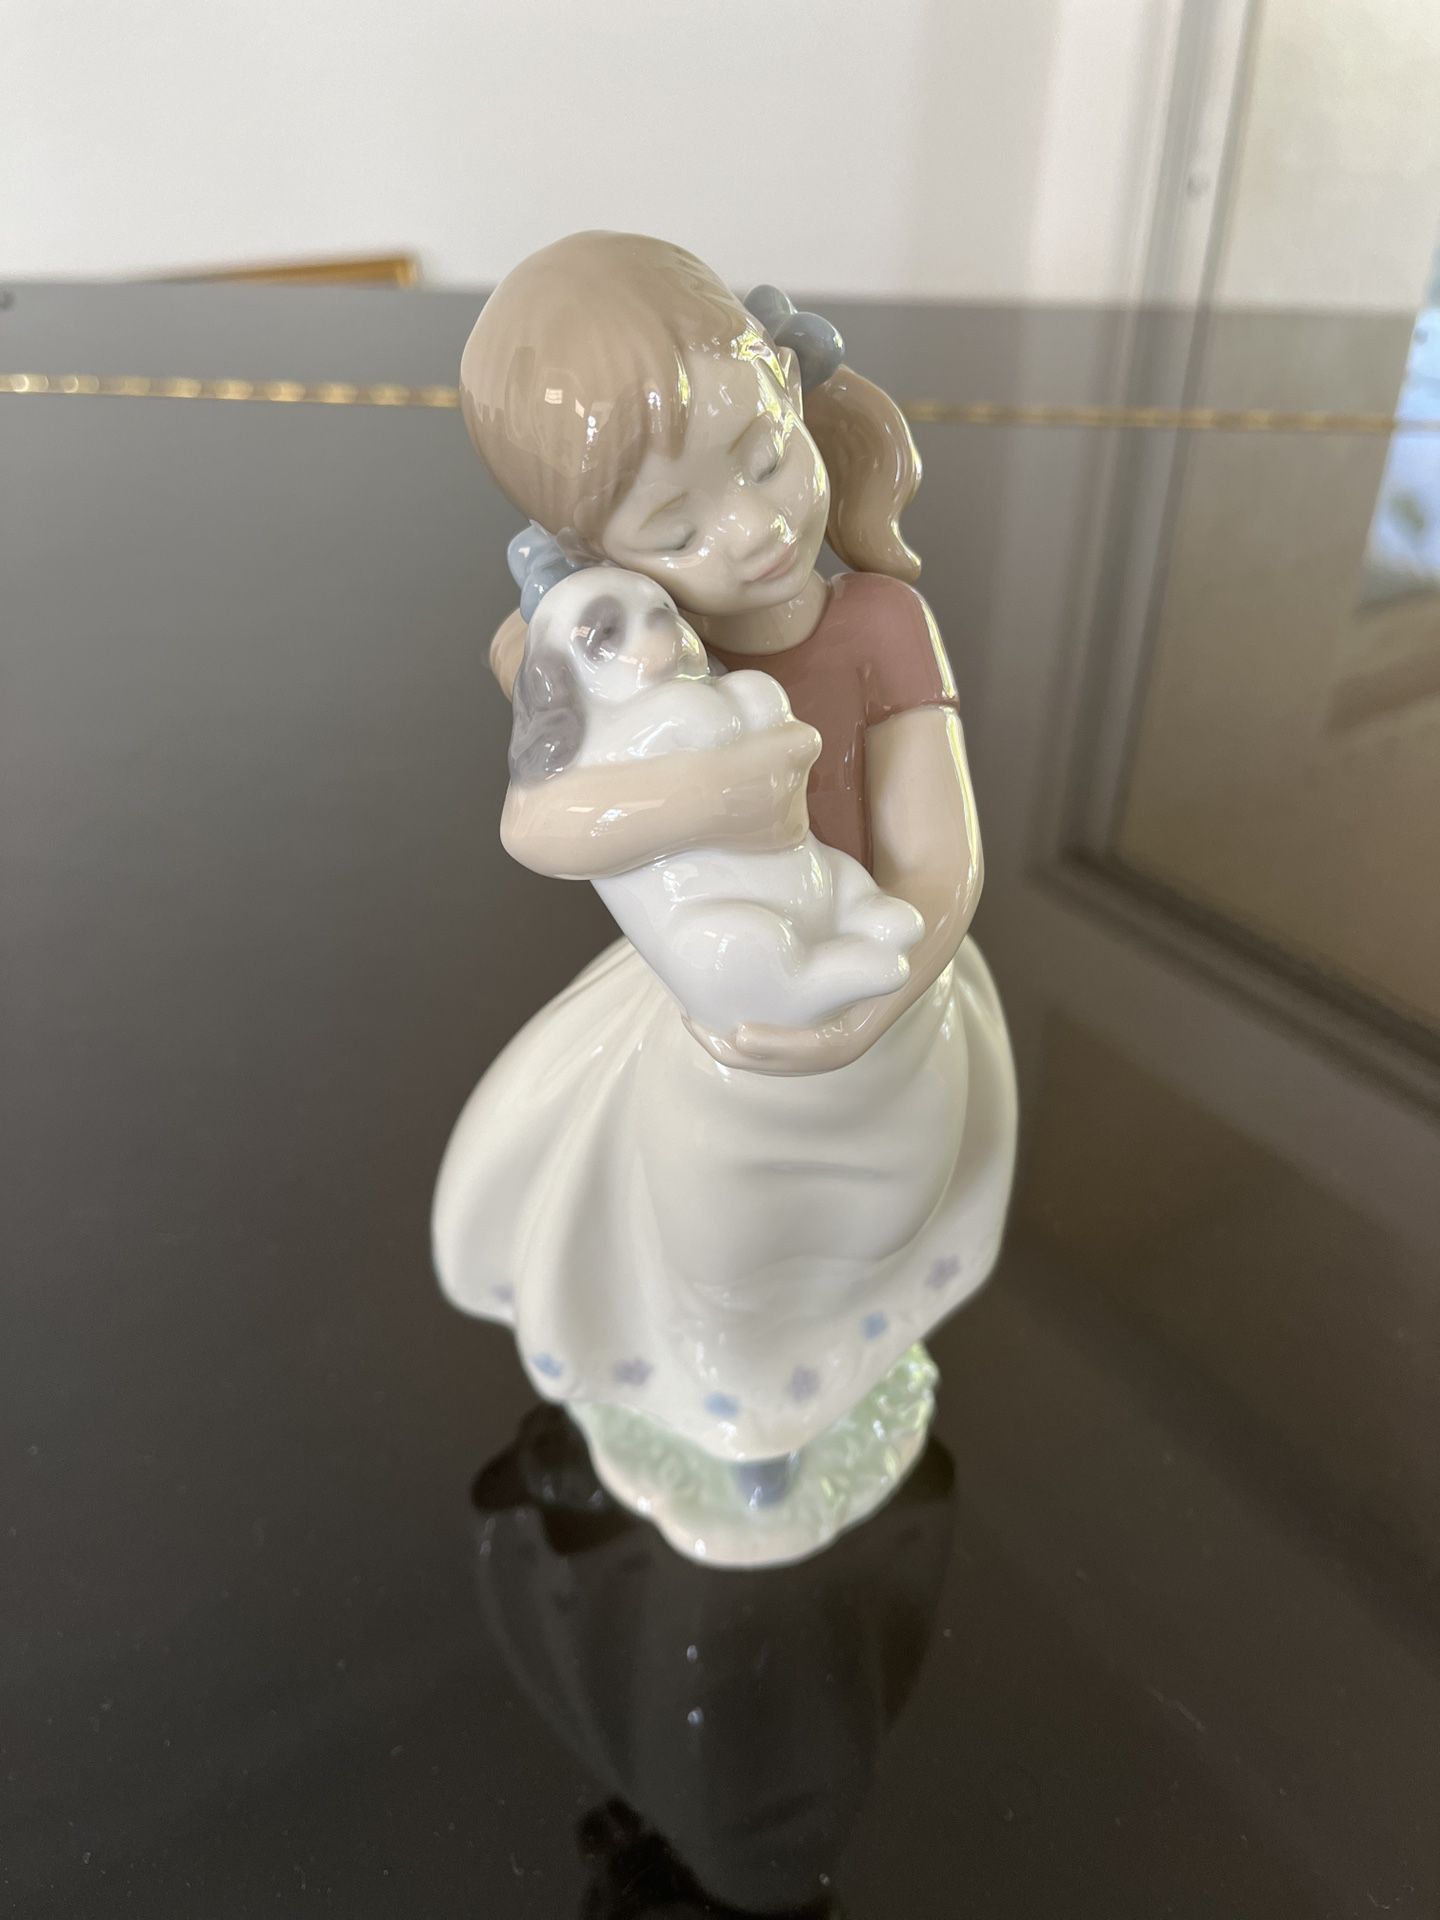 Lladro Figurine Called “My Sweet Little Puppy” New In Box